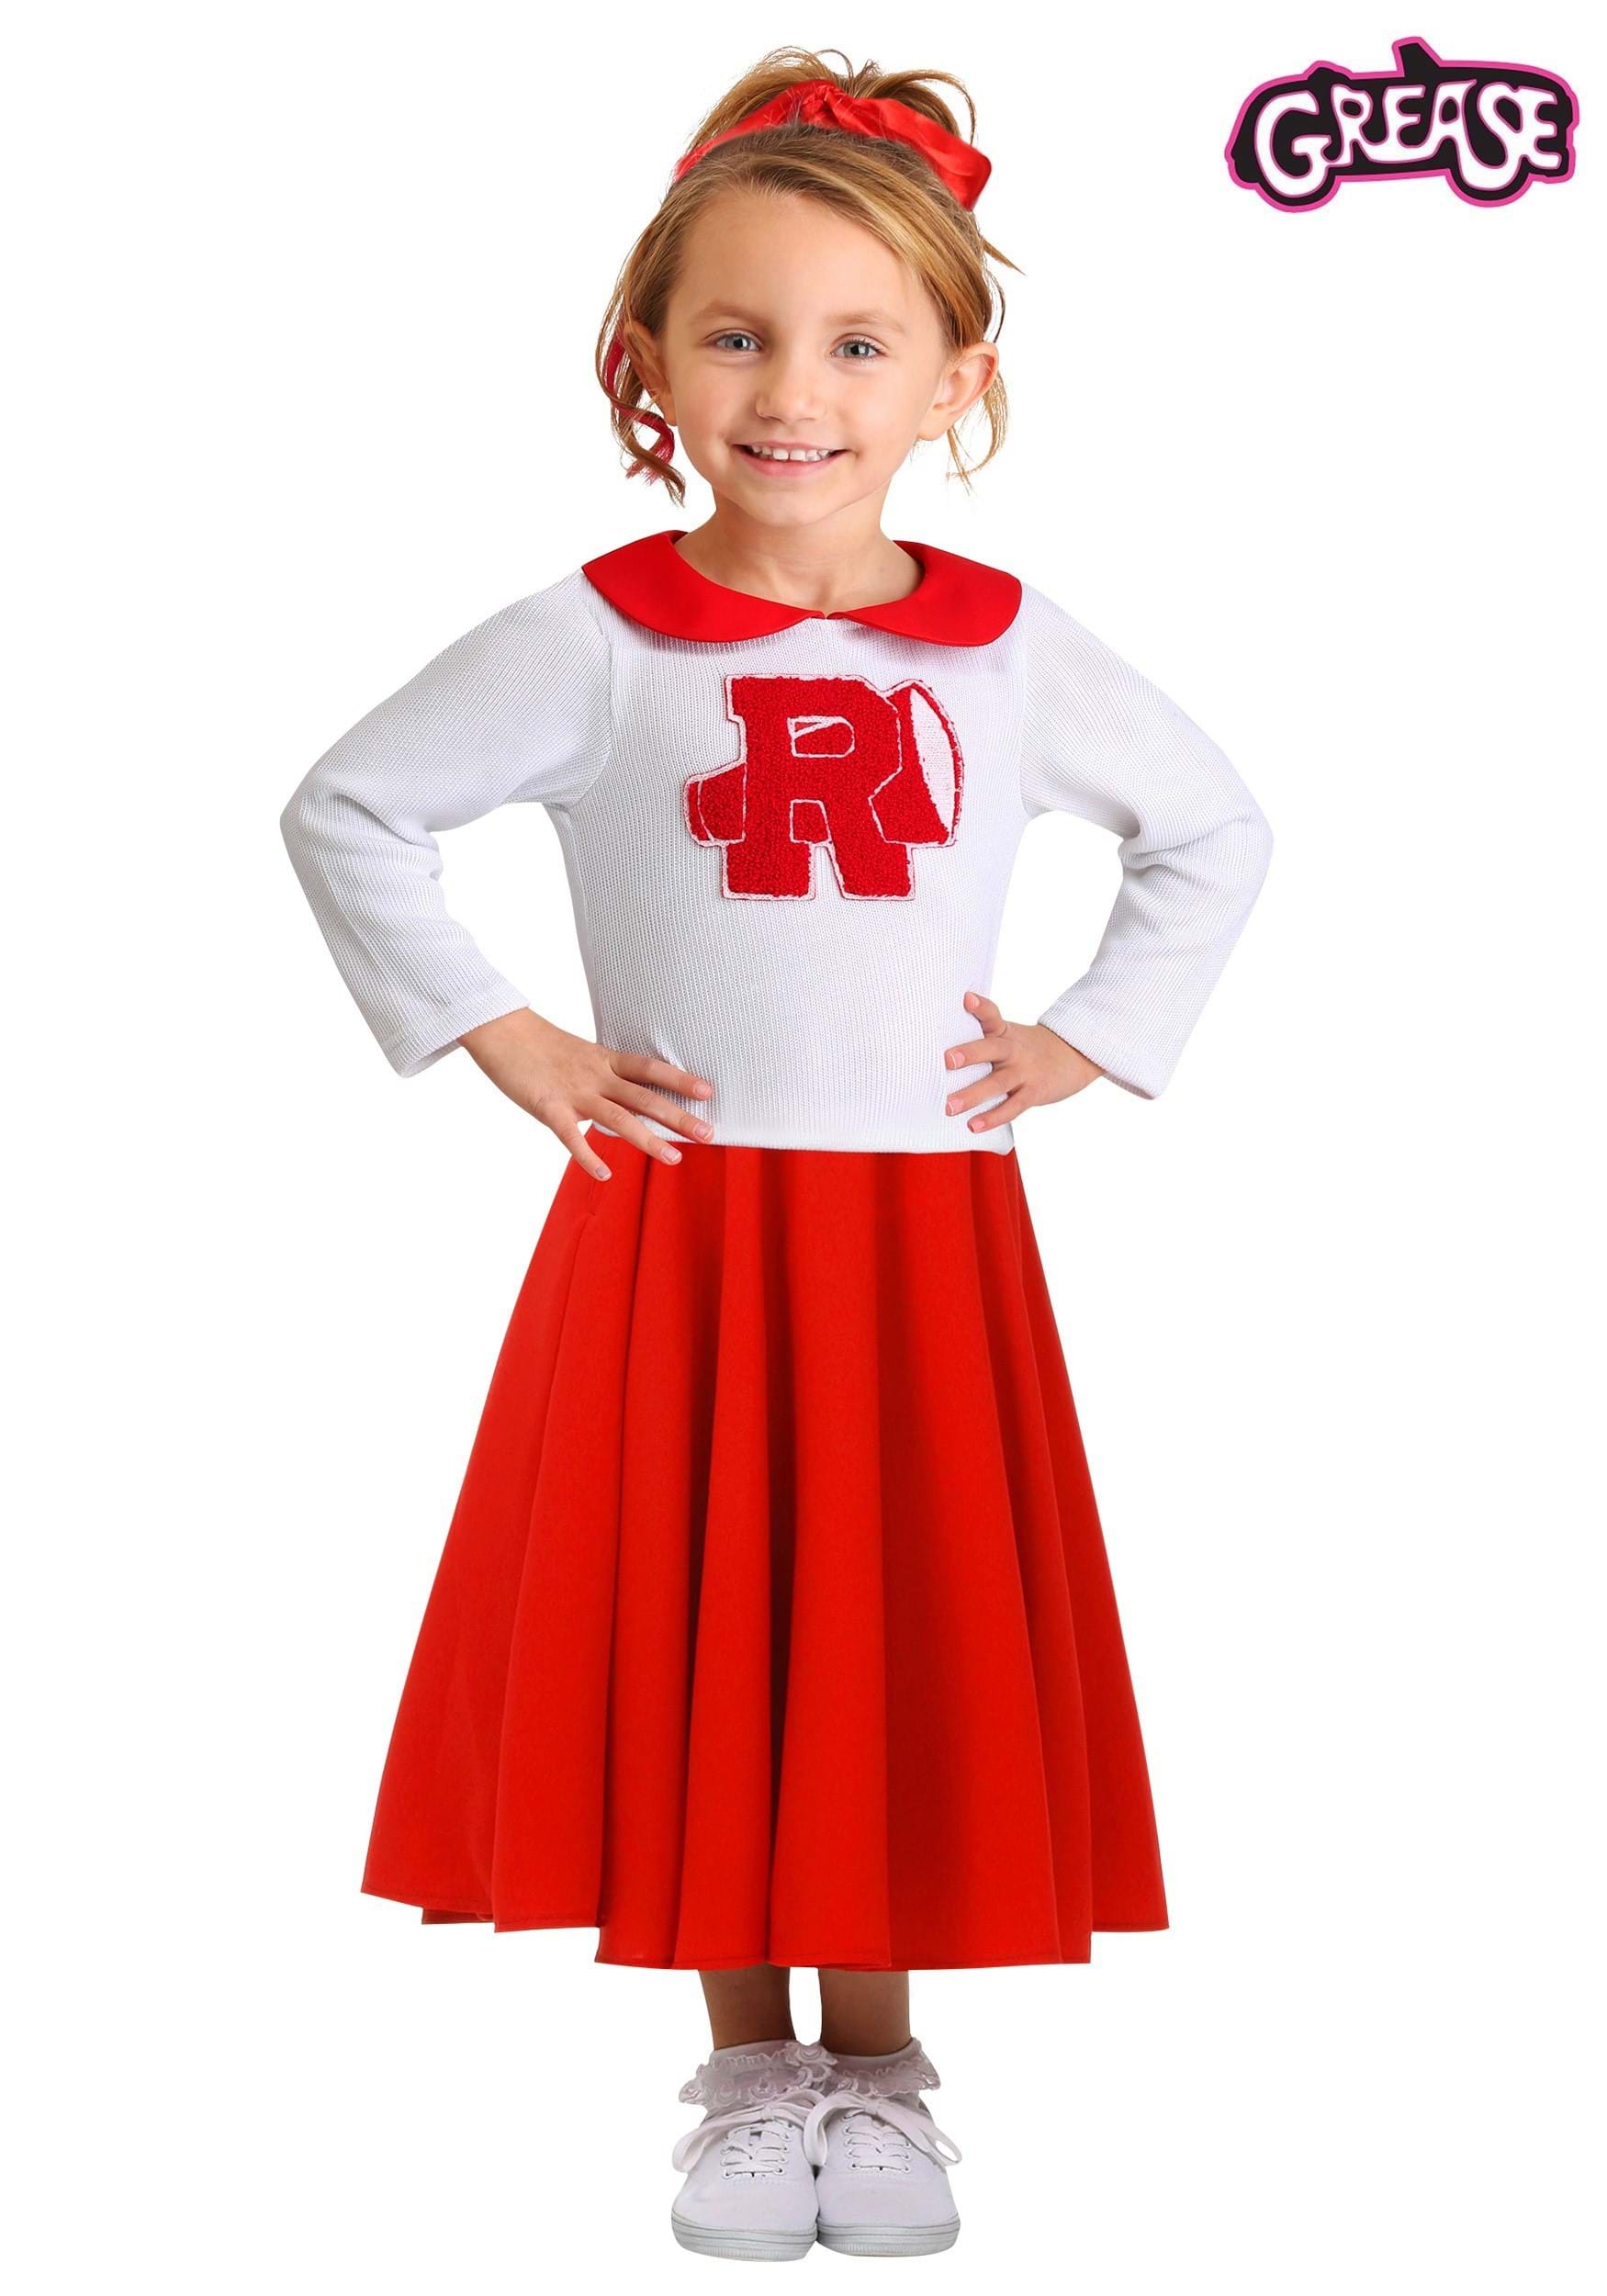 Toddler Grease Rydell High Cheerleader Costume